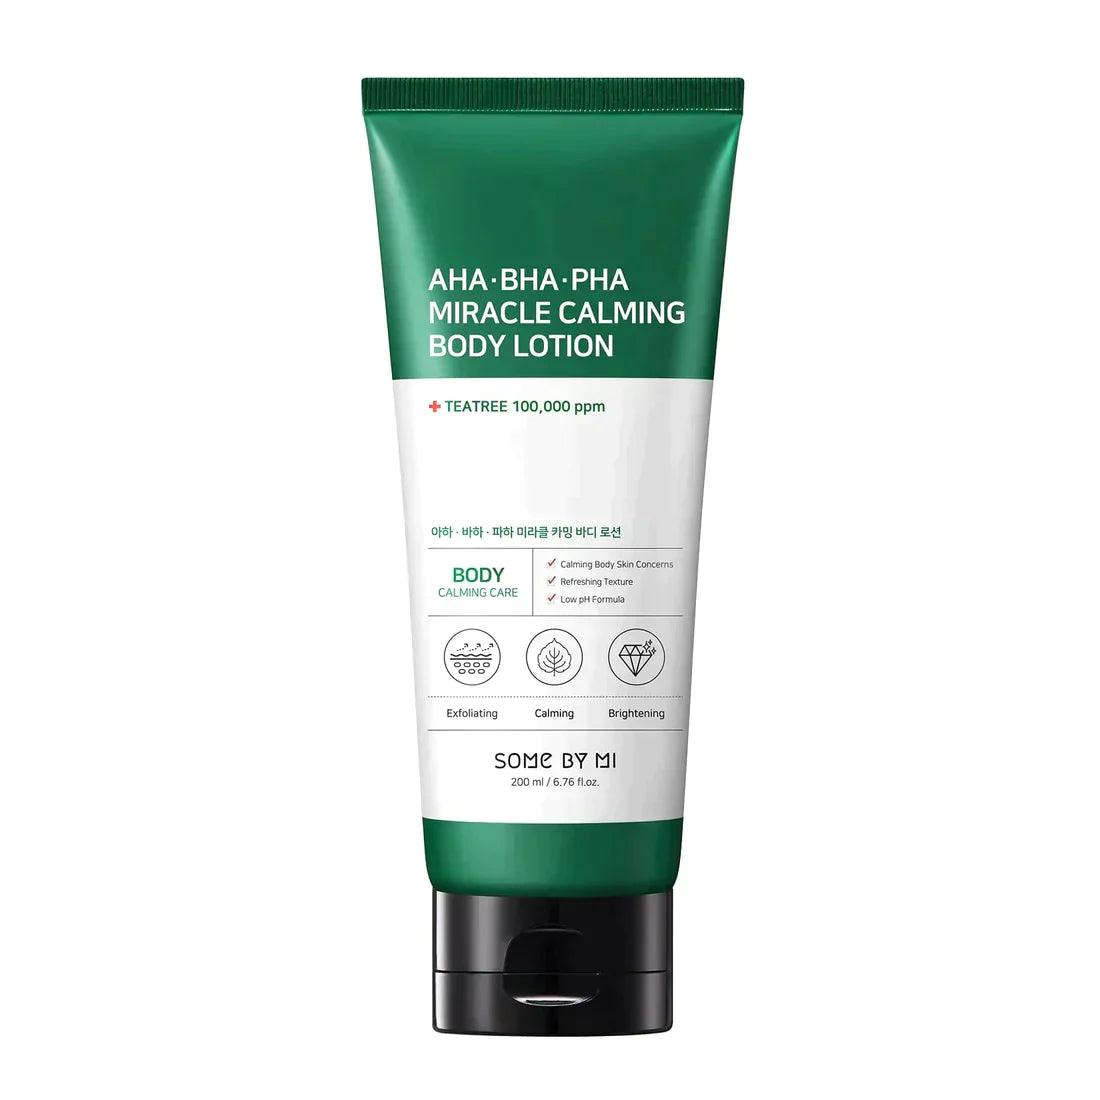 Some by mi AHA BHA PHA Miracle Calming Body Lotion